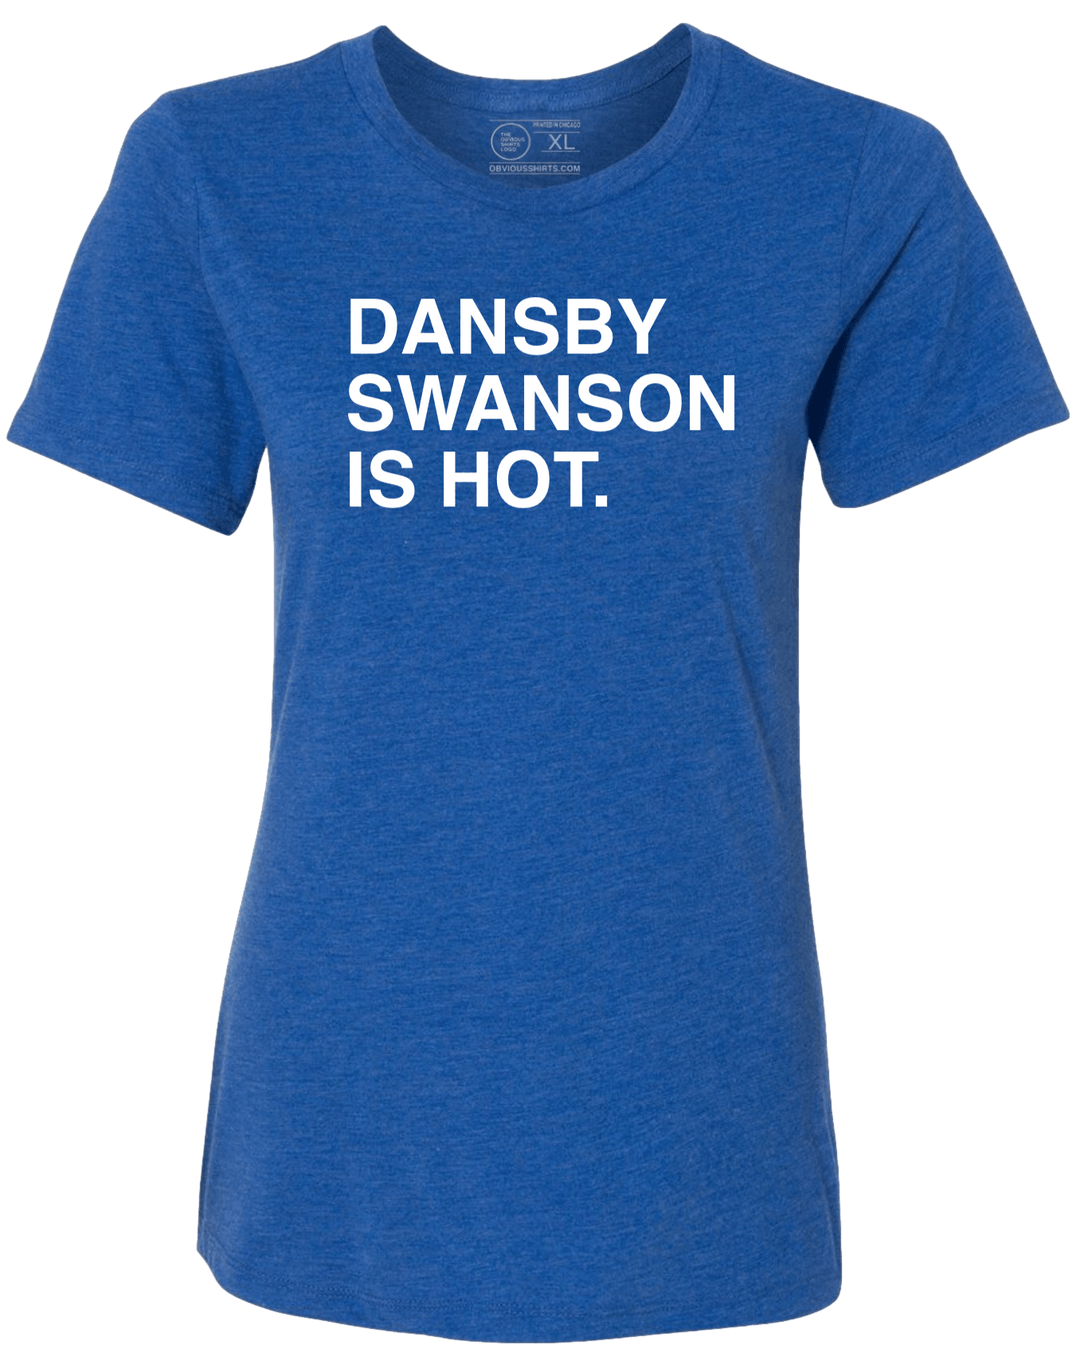 Order Dansby Swanson T-Shirt